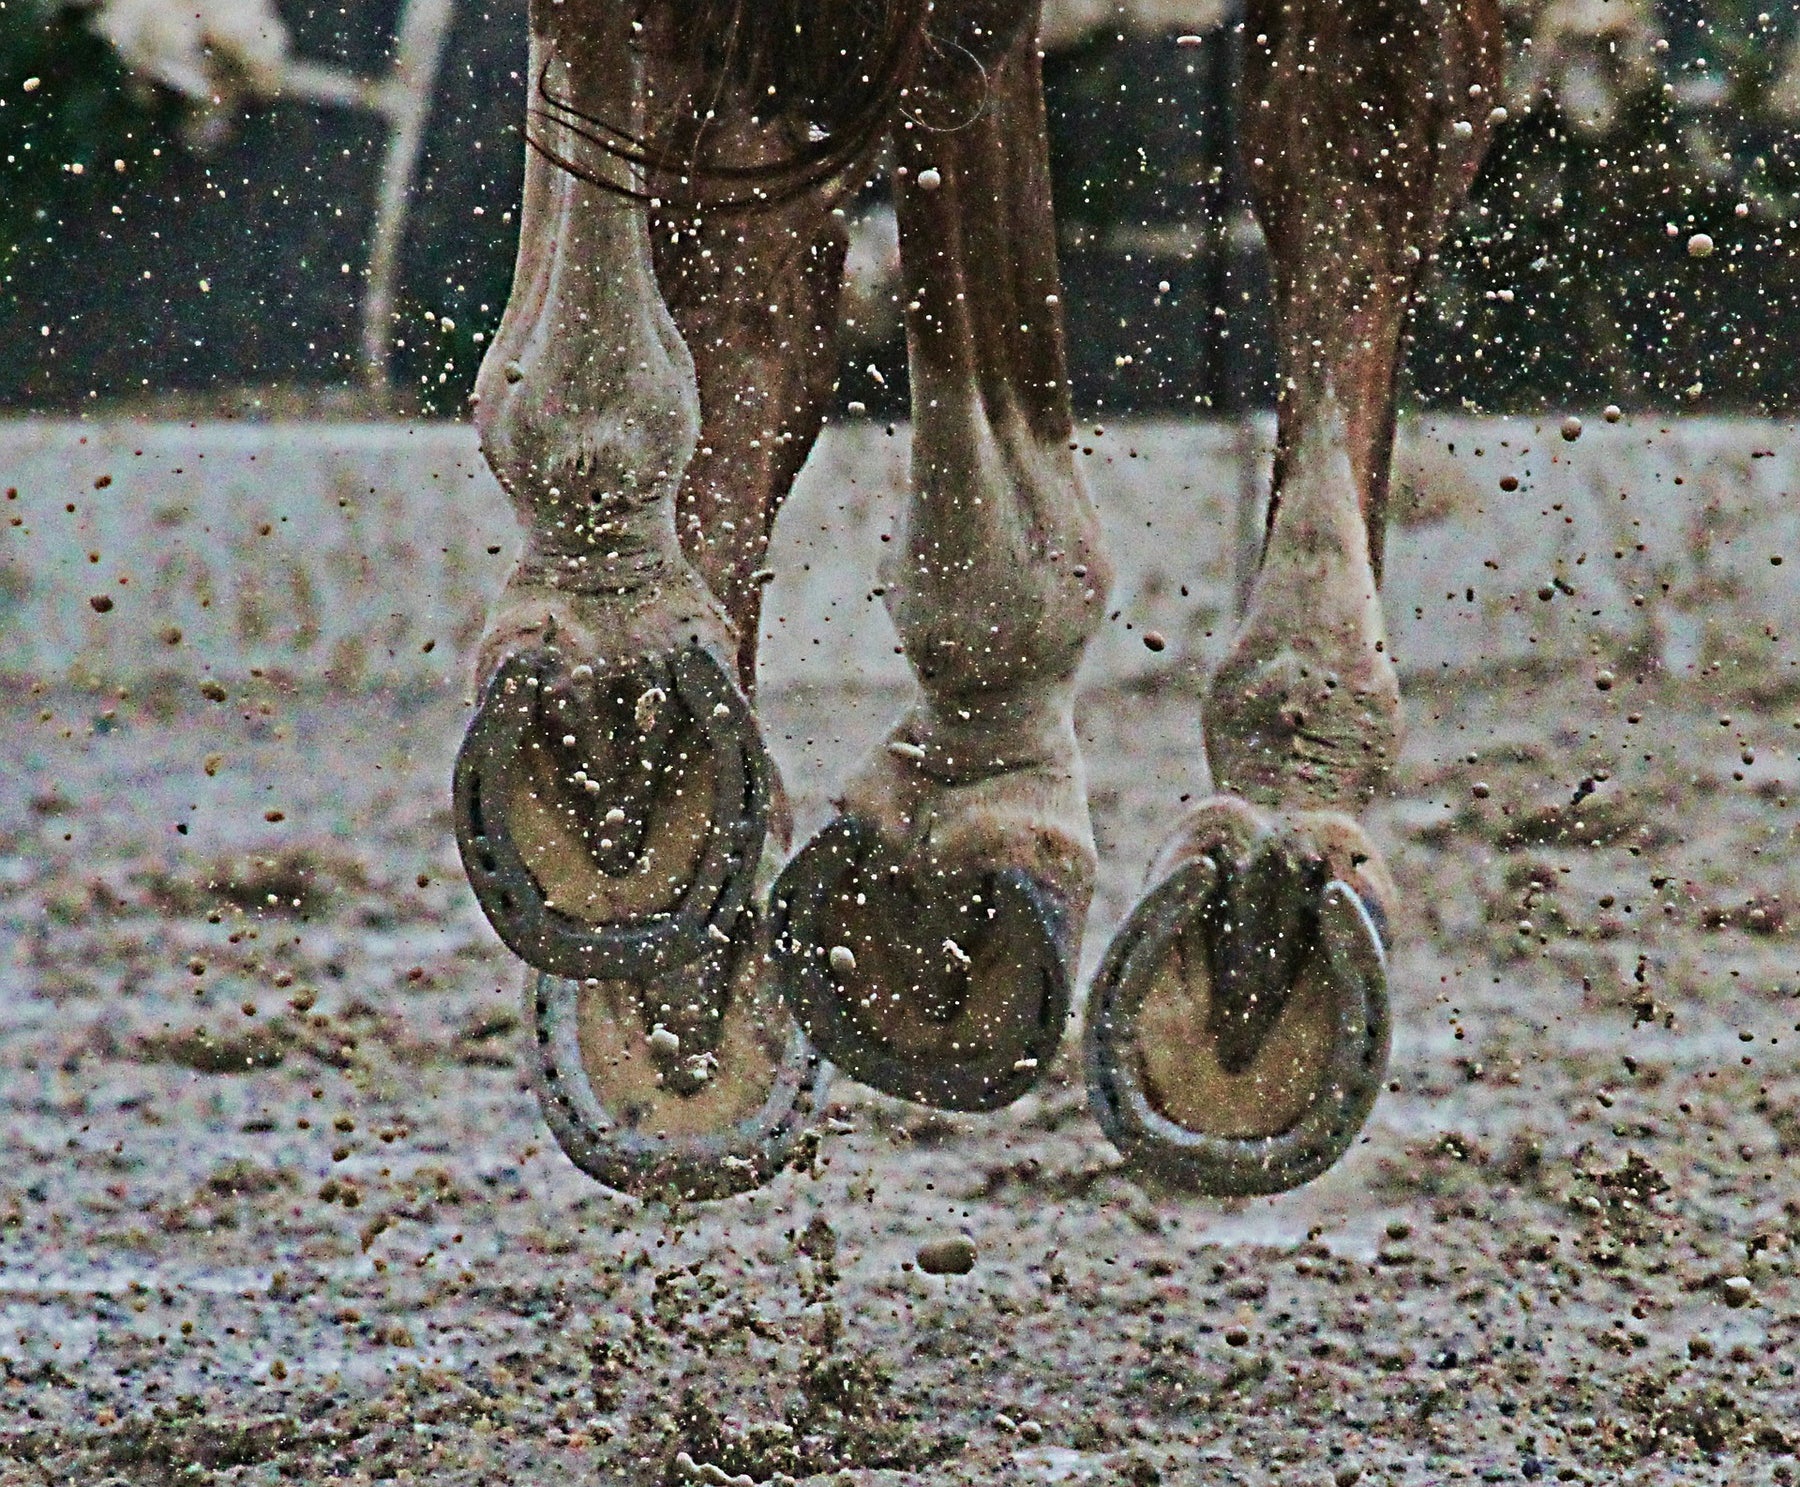 Horse hooves midair at an event showing horseshoes